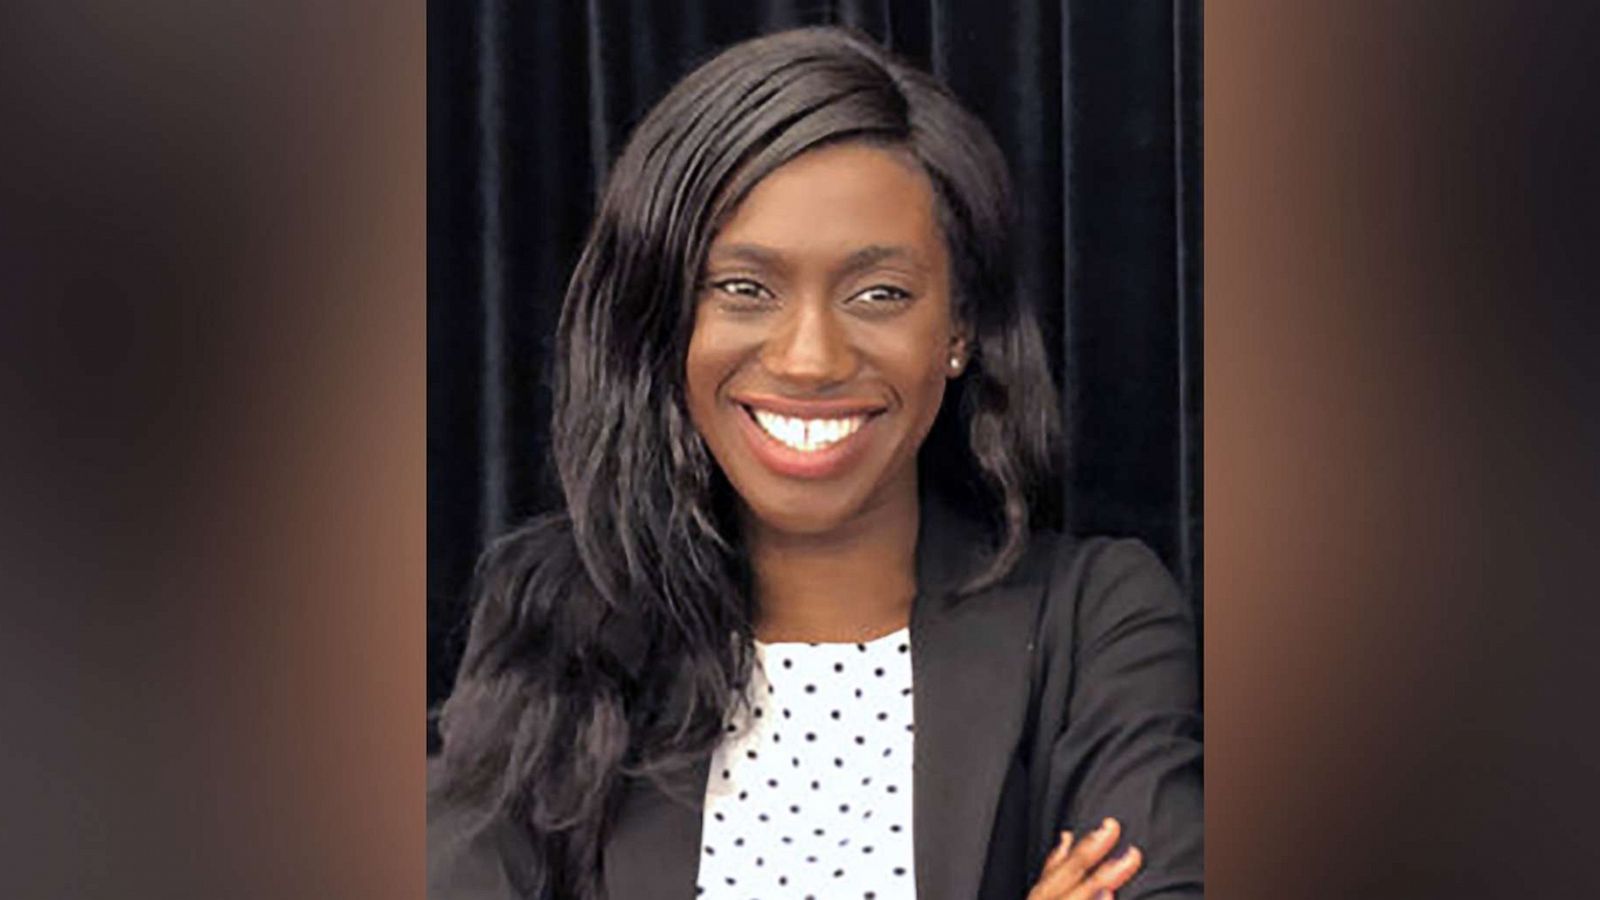 New Jersey councilwoman shot and killed in possible targeted attack outside her home photo pic